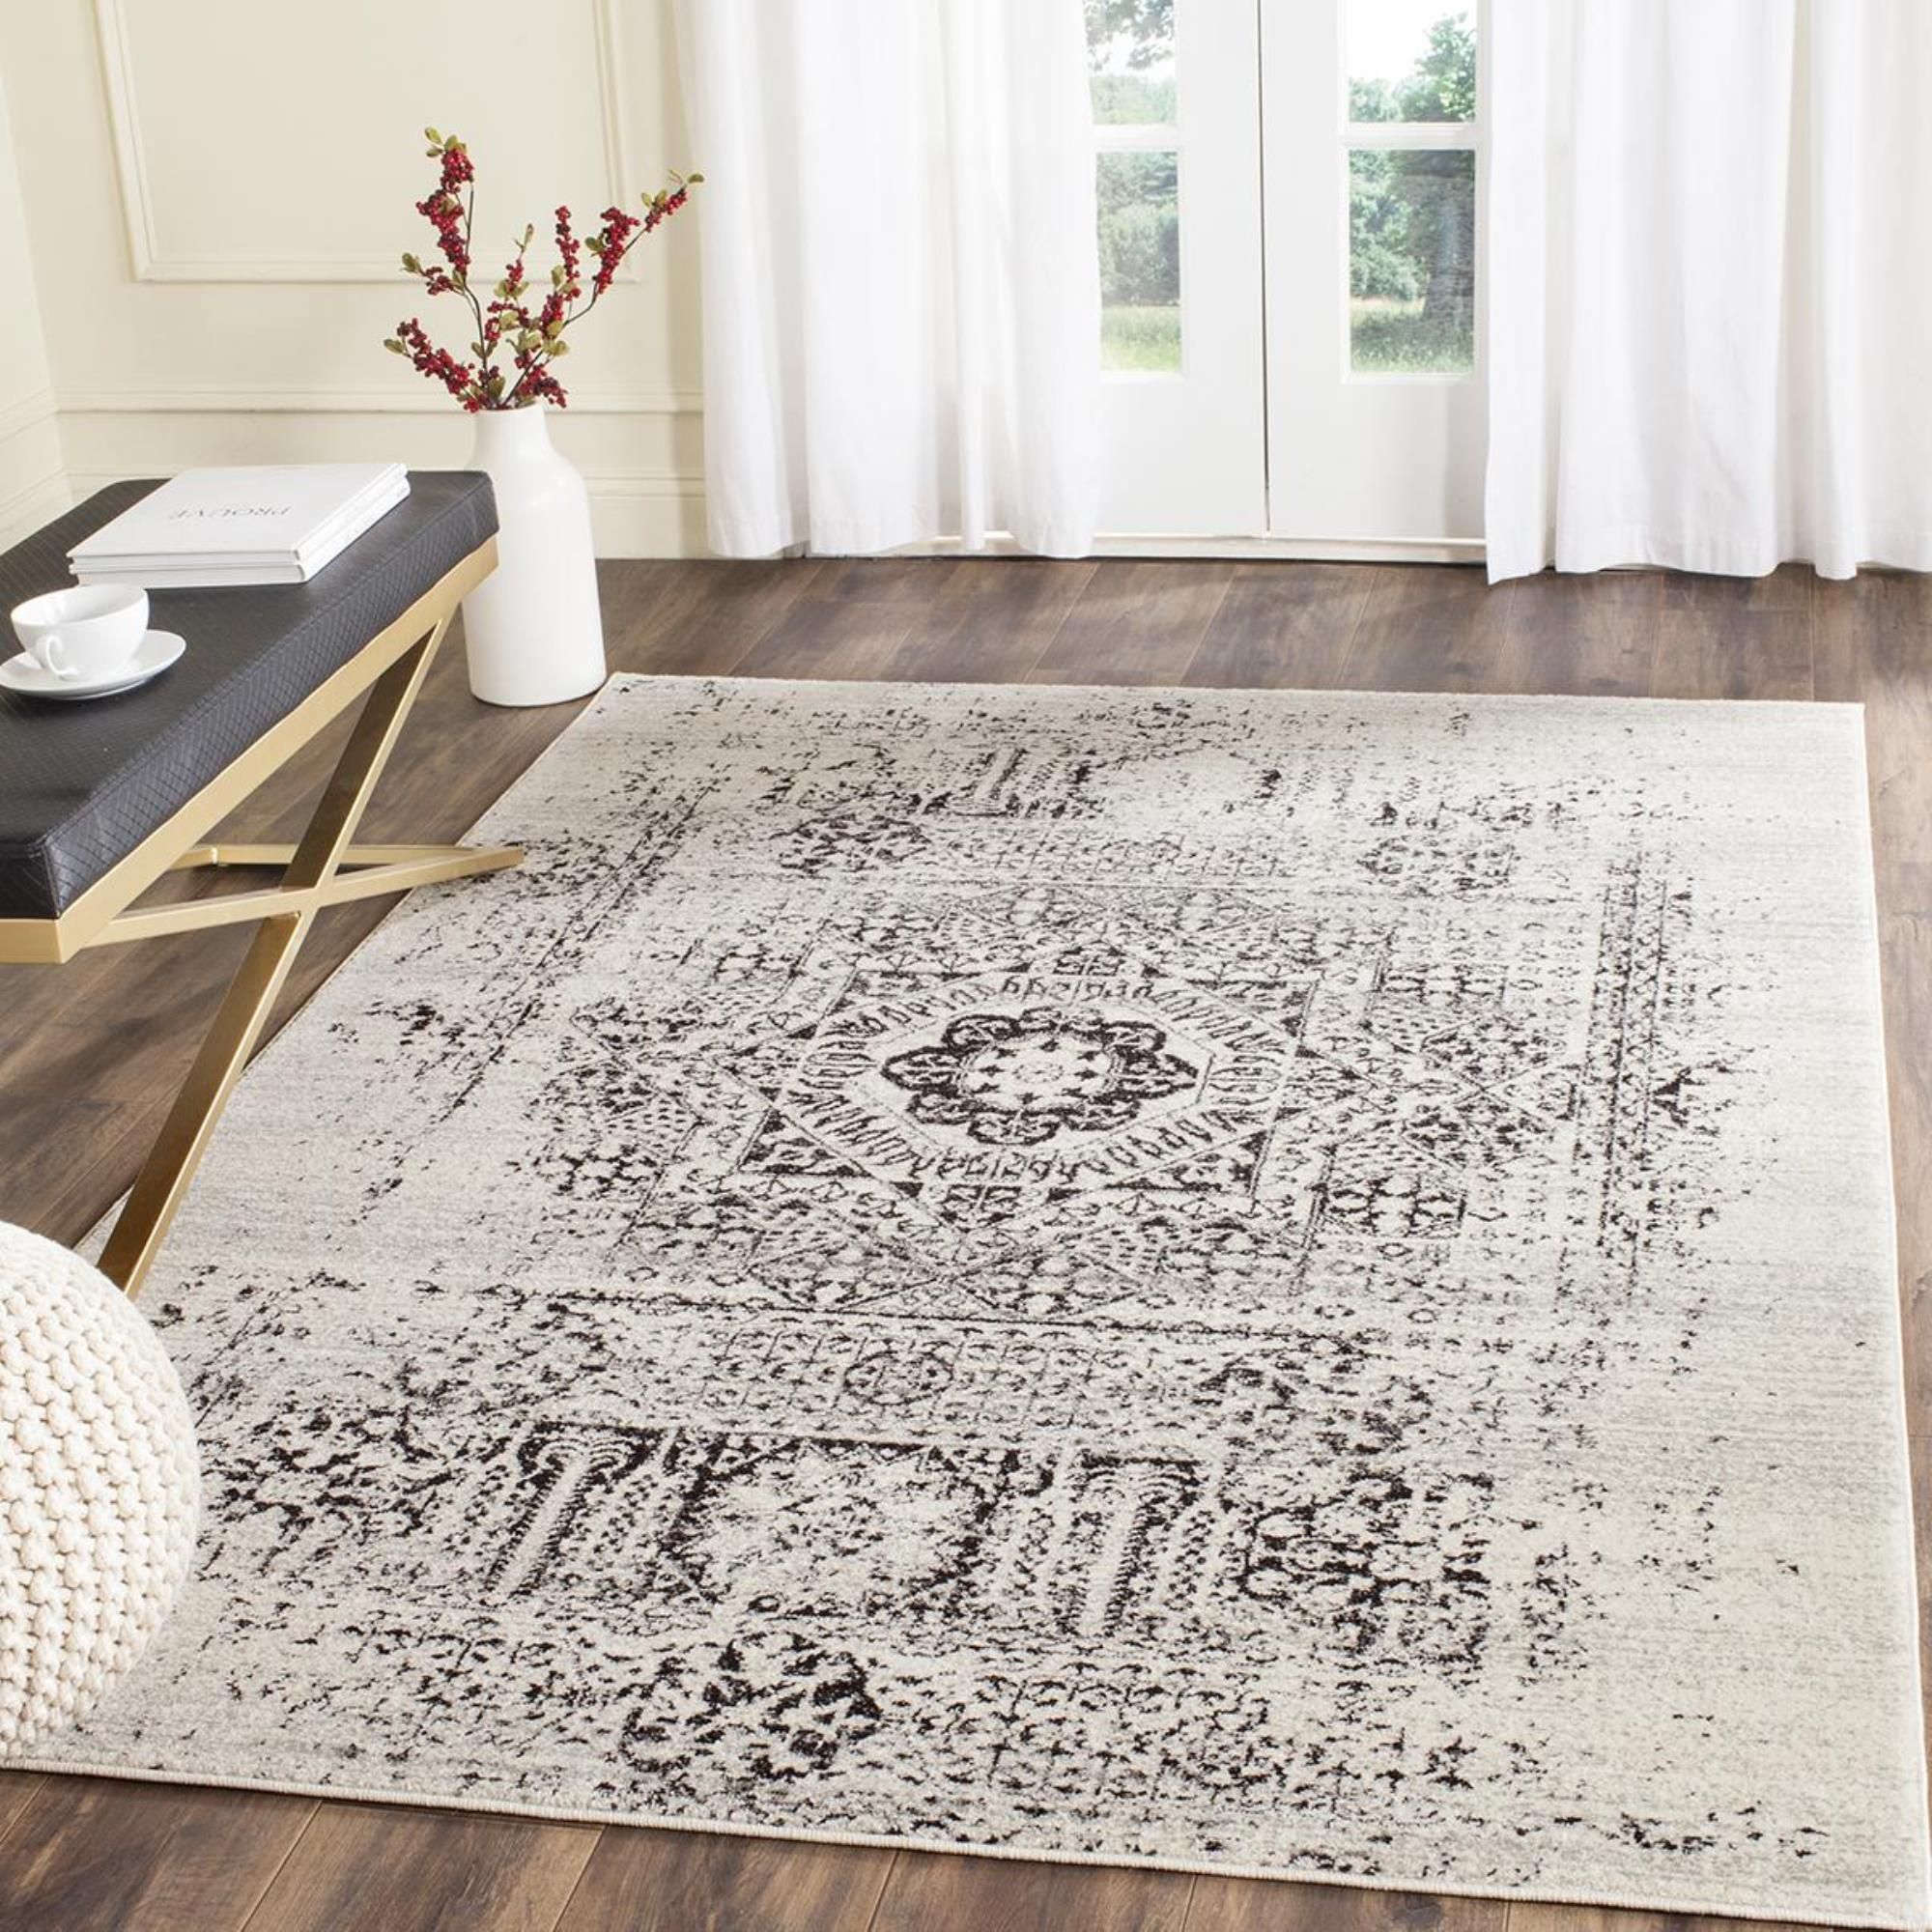 Safavieh Evoke Evk260T 4 4' X 6' Ivory/Black Area Rug | Nfm With Ivory And Black Rugs (View 4 of 15)